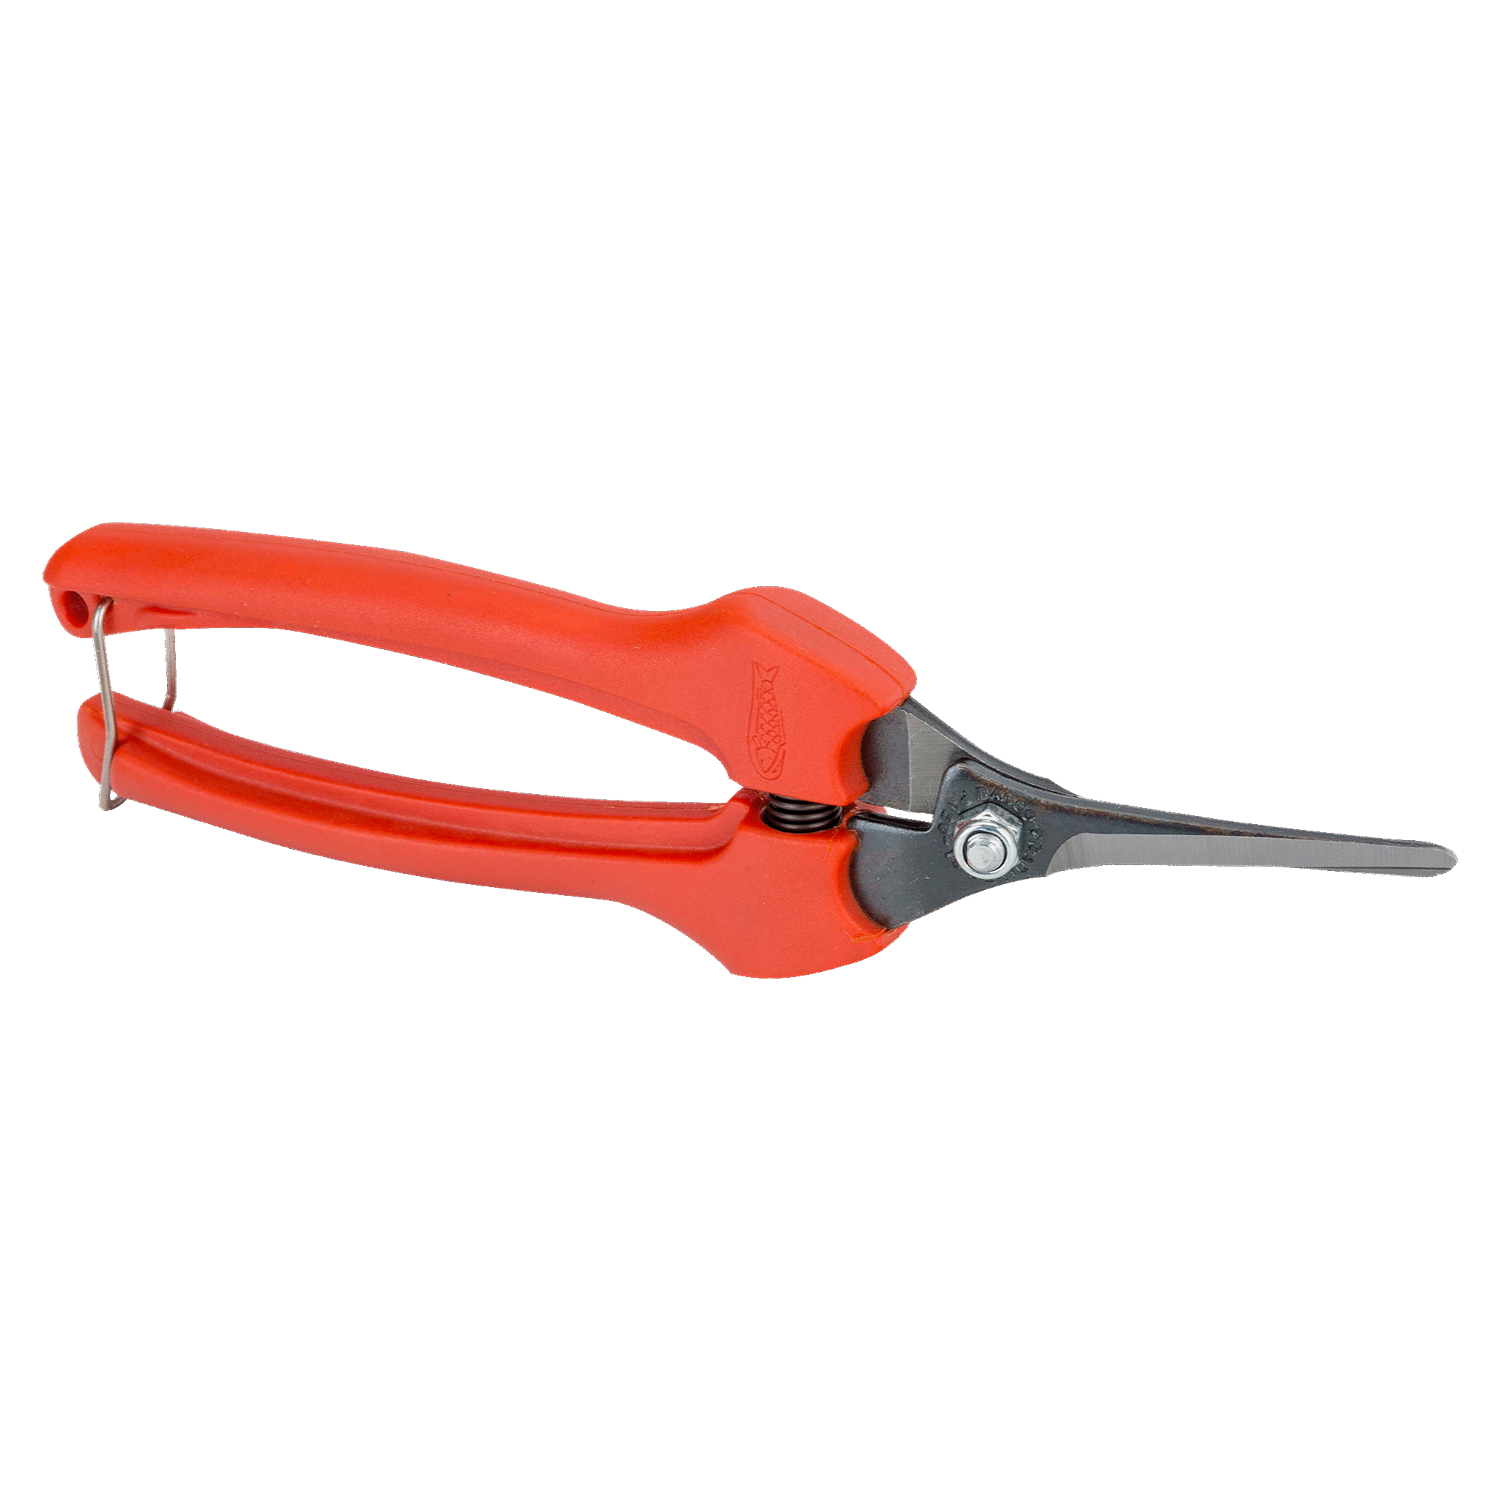 BAHCO P129 11° Angled Snips with Fibreglass Handle (BAHCO Tools) - Premium Snips from BAHCO - Shop now at Yew Aik.